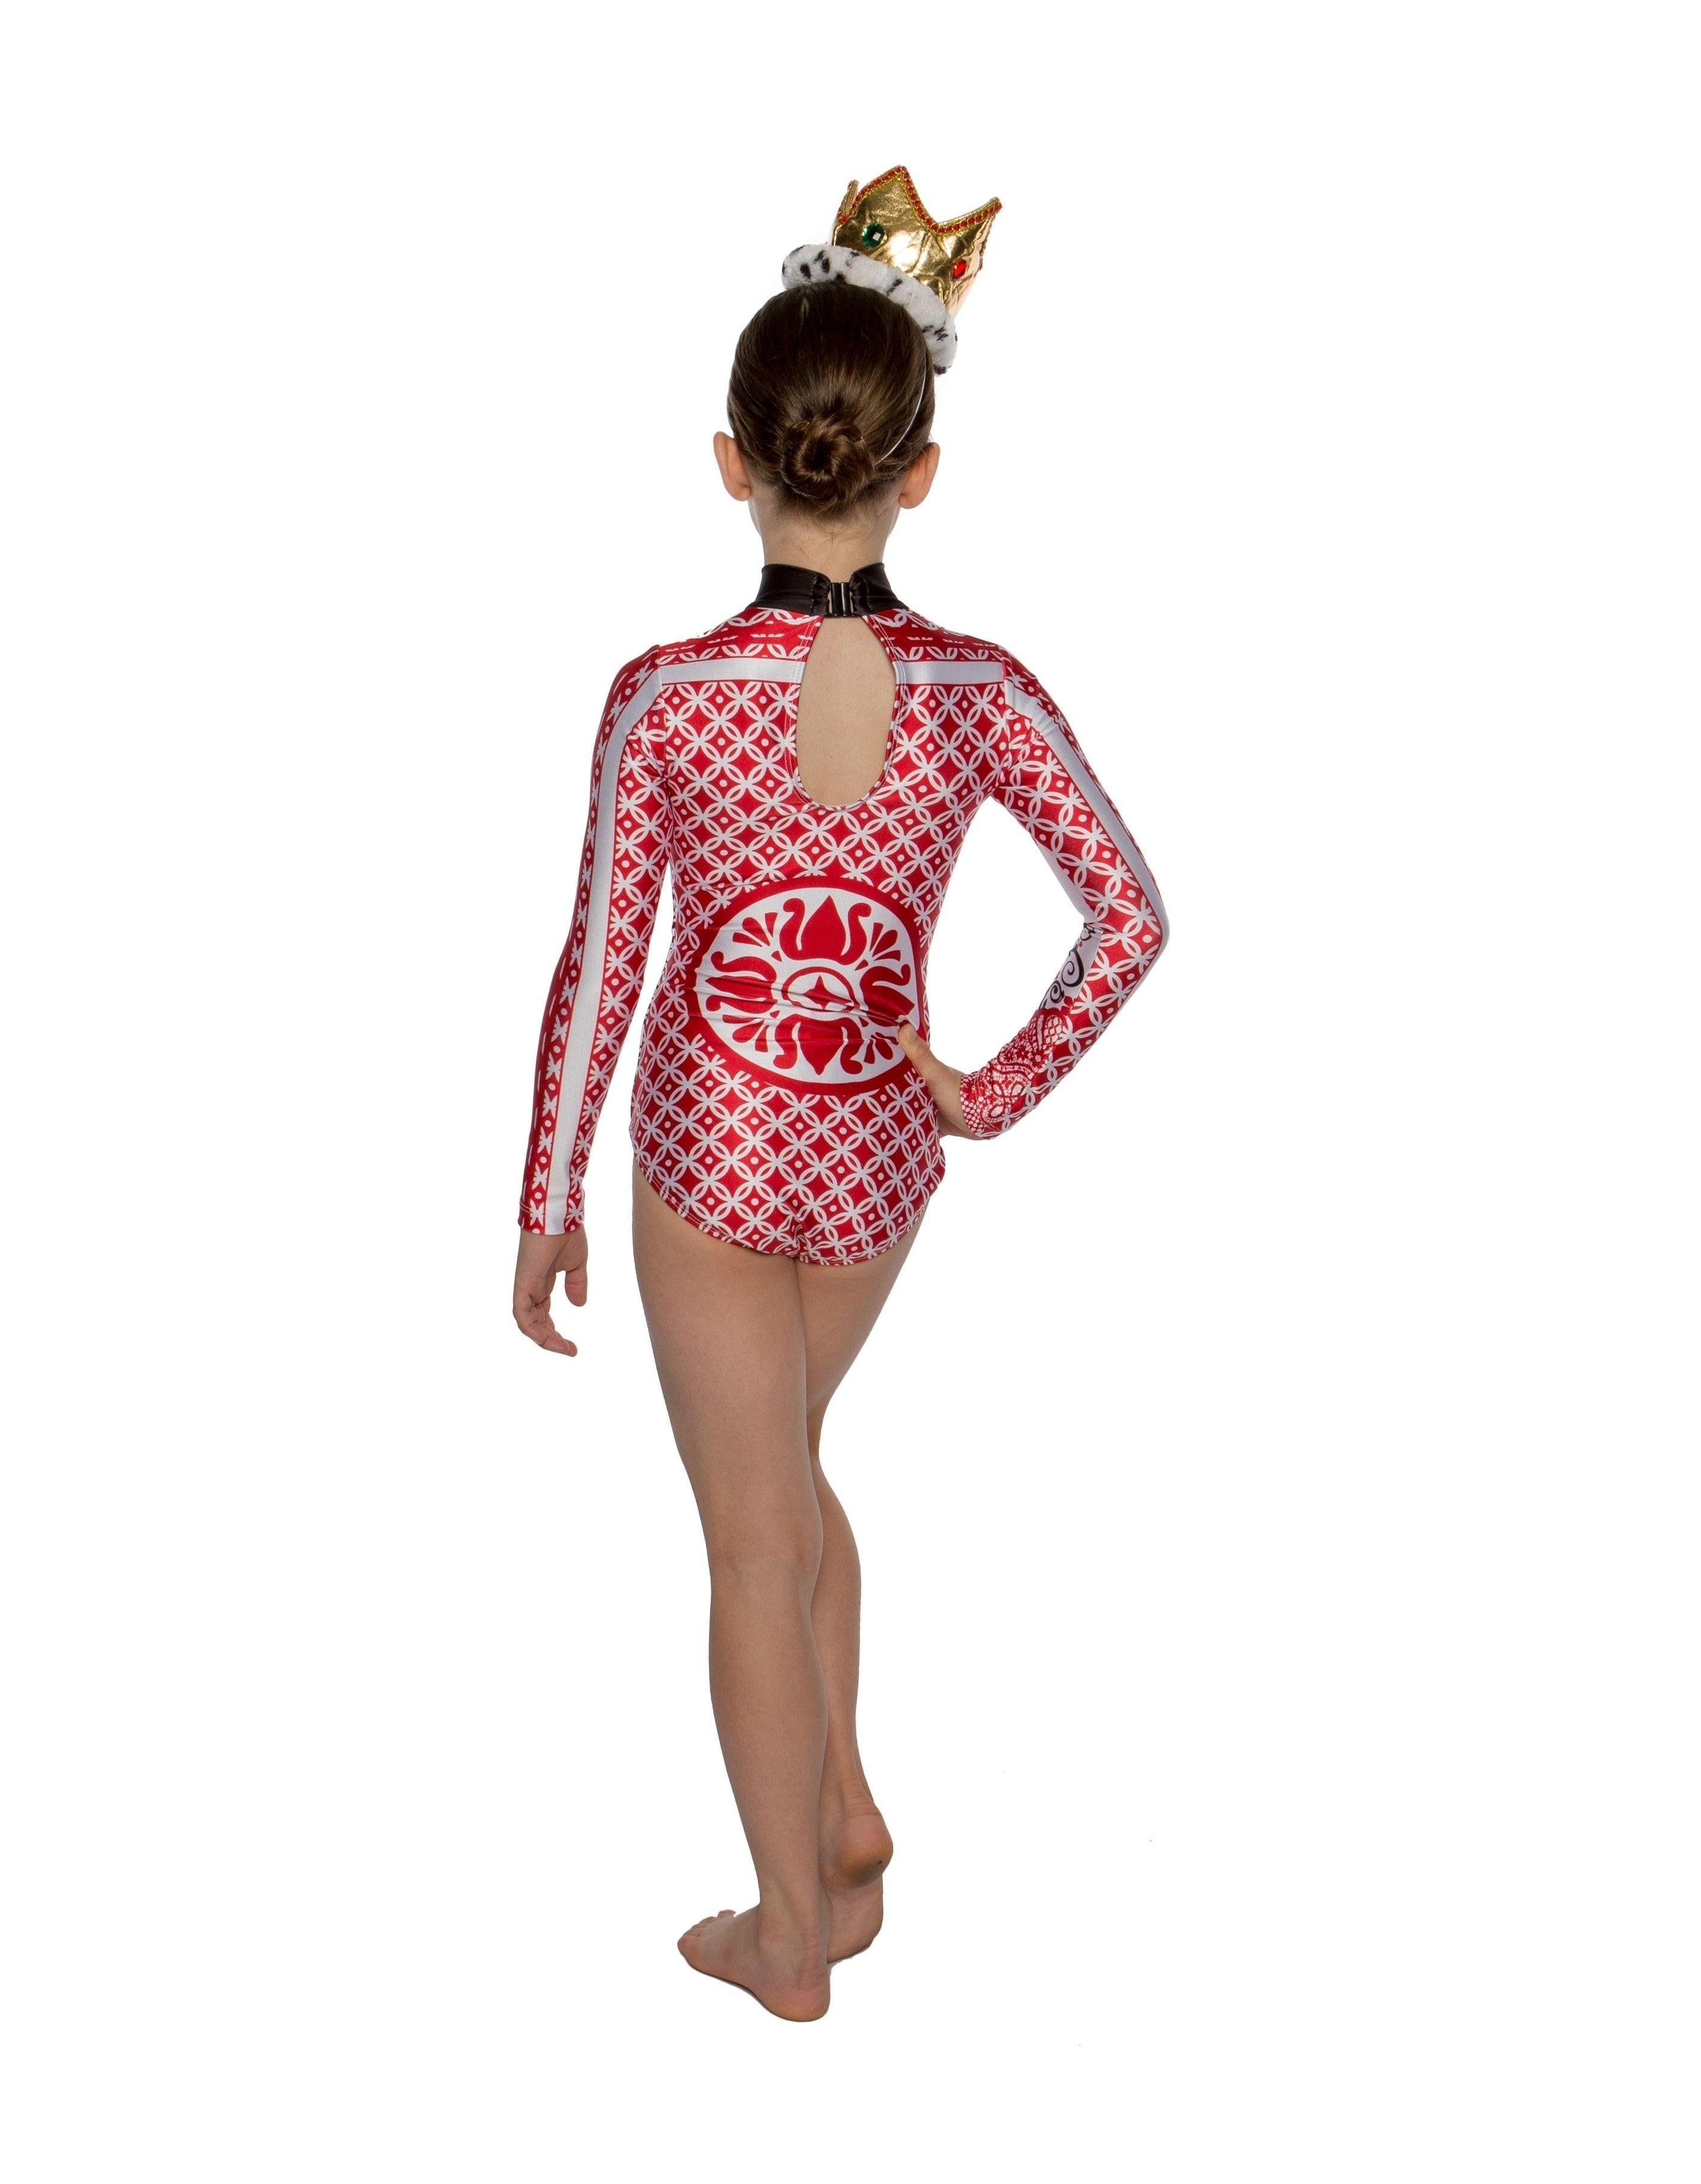 House of Cards LS Leotard - Hamilton Theatrical